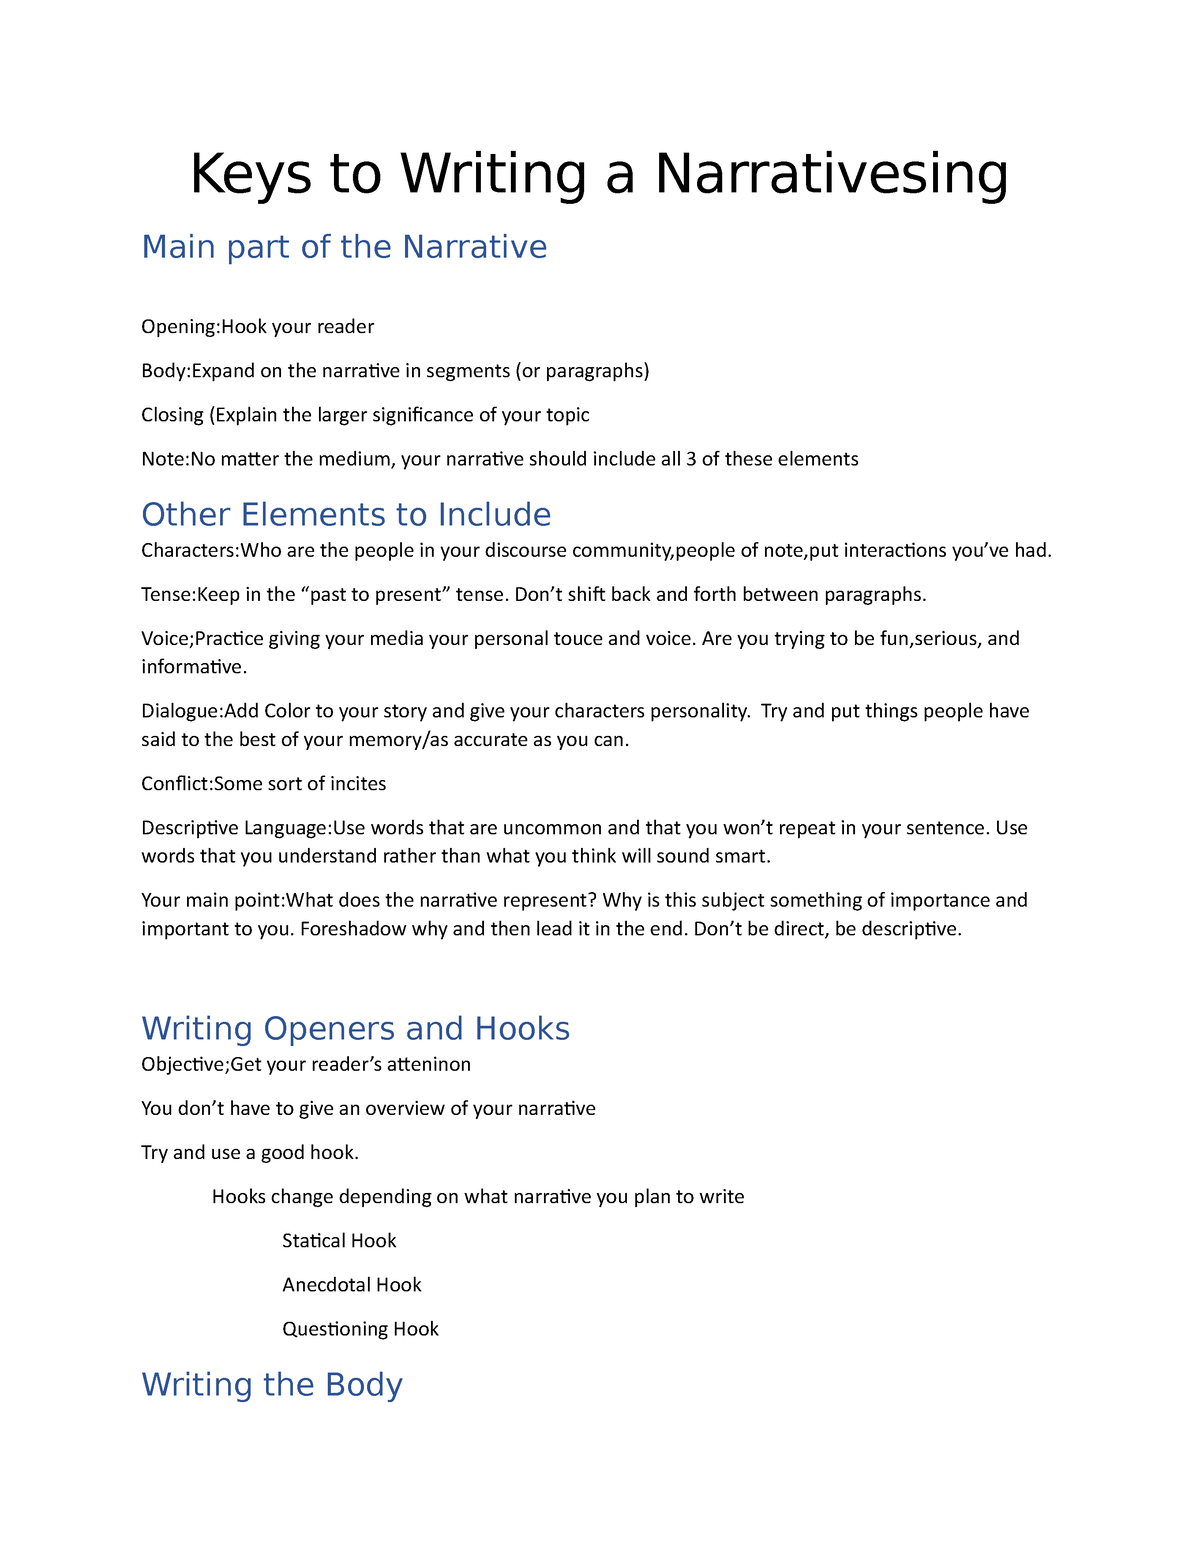 keys-to-writing-a-narrativesing-tense-keep-in-the-past-to-present